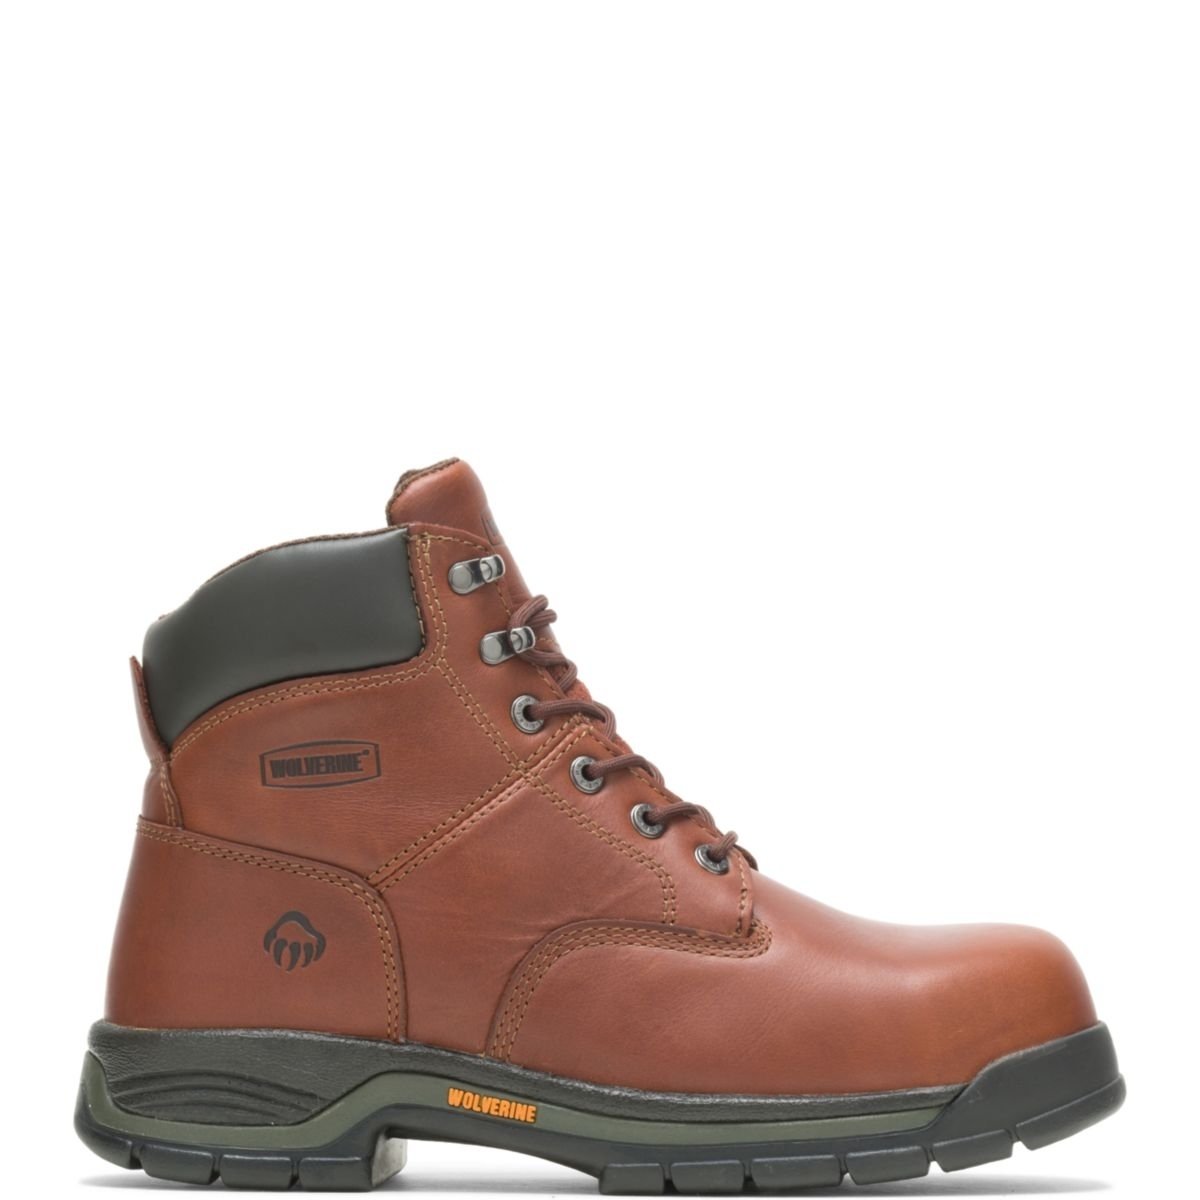 WOLVERINE Men's Harrison 6 Lace-Up SoftToe Work Boot Brown - W04906 Varies BROWN - BROWN, 10.5 X-Wide